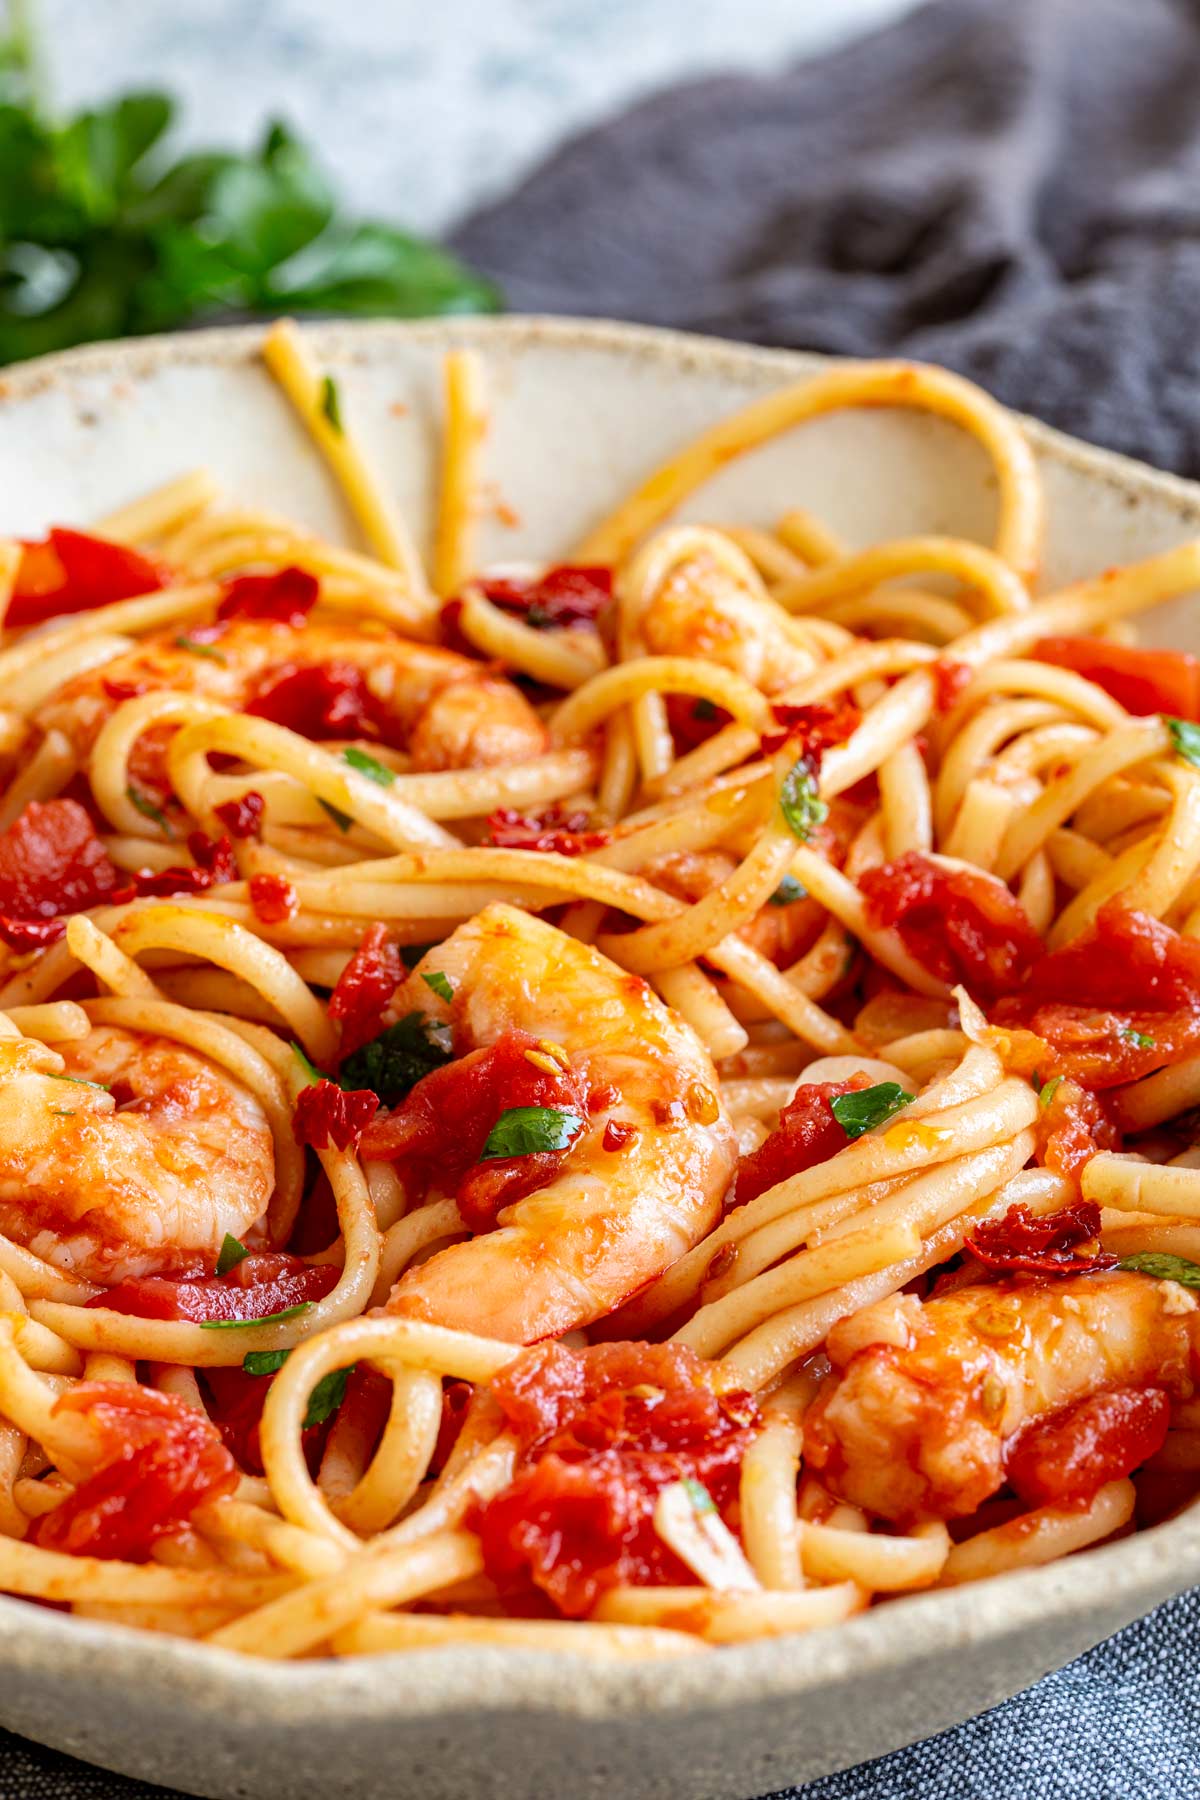 shrimp with a spicy tomato sauce mixed with spaghetti in a rustic bowl